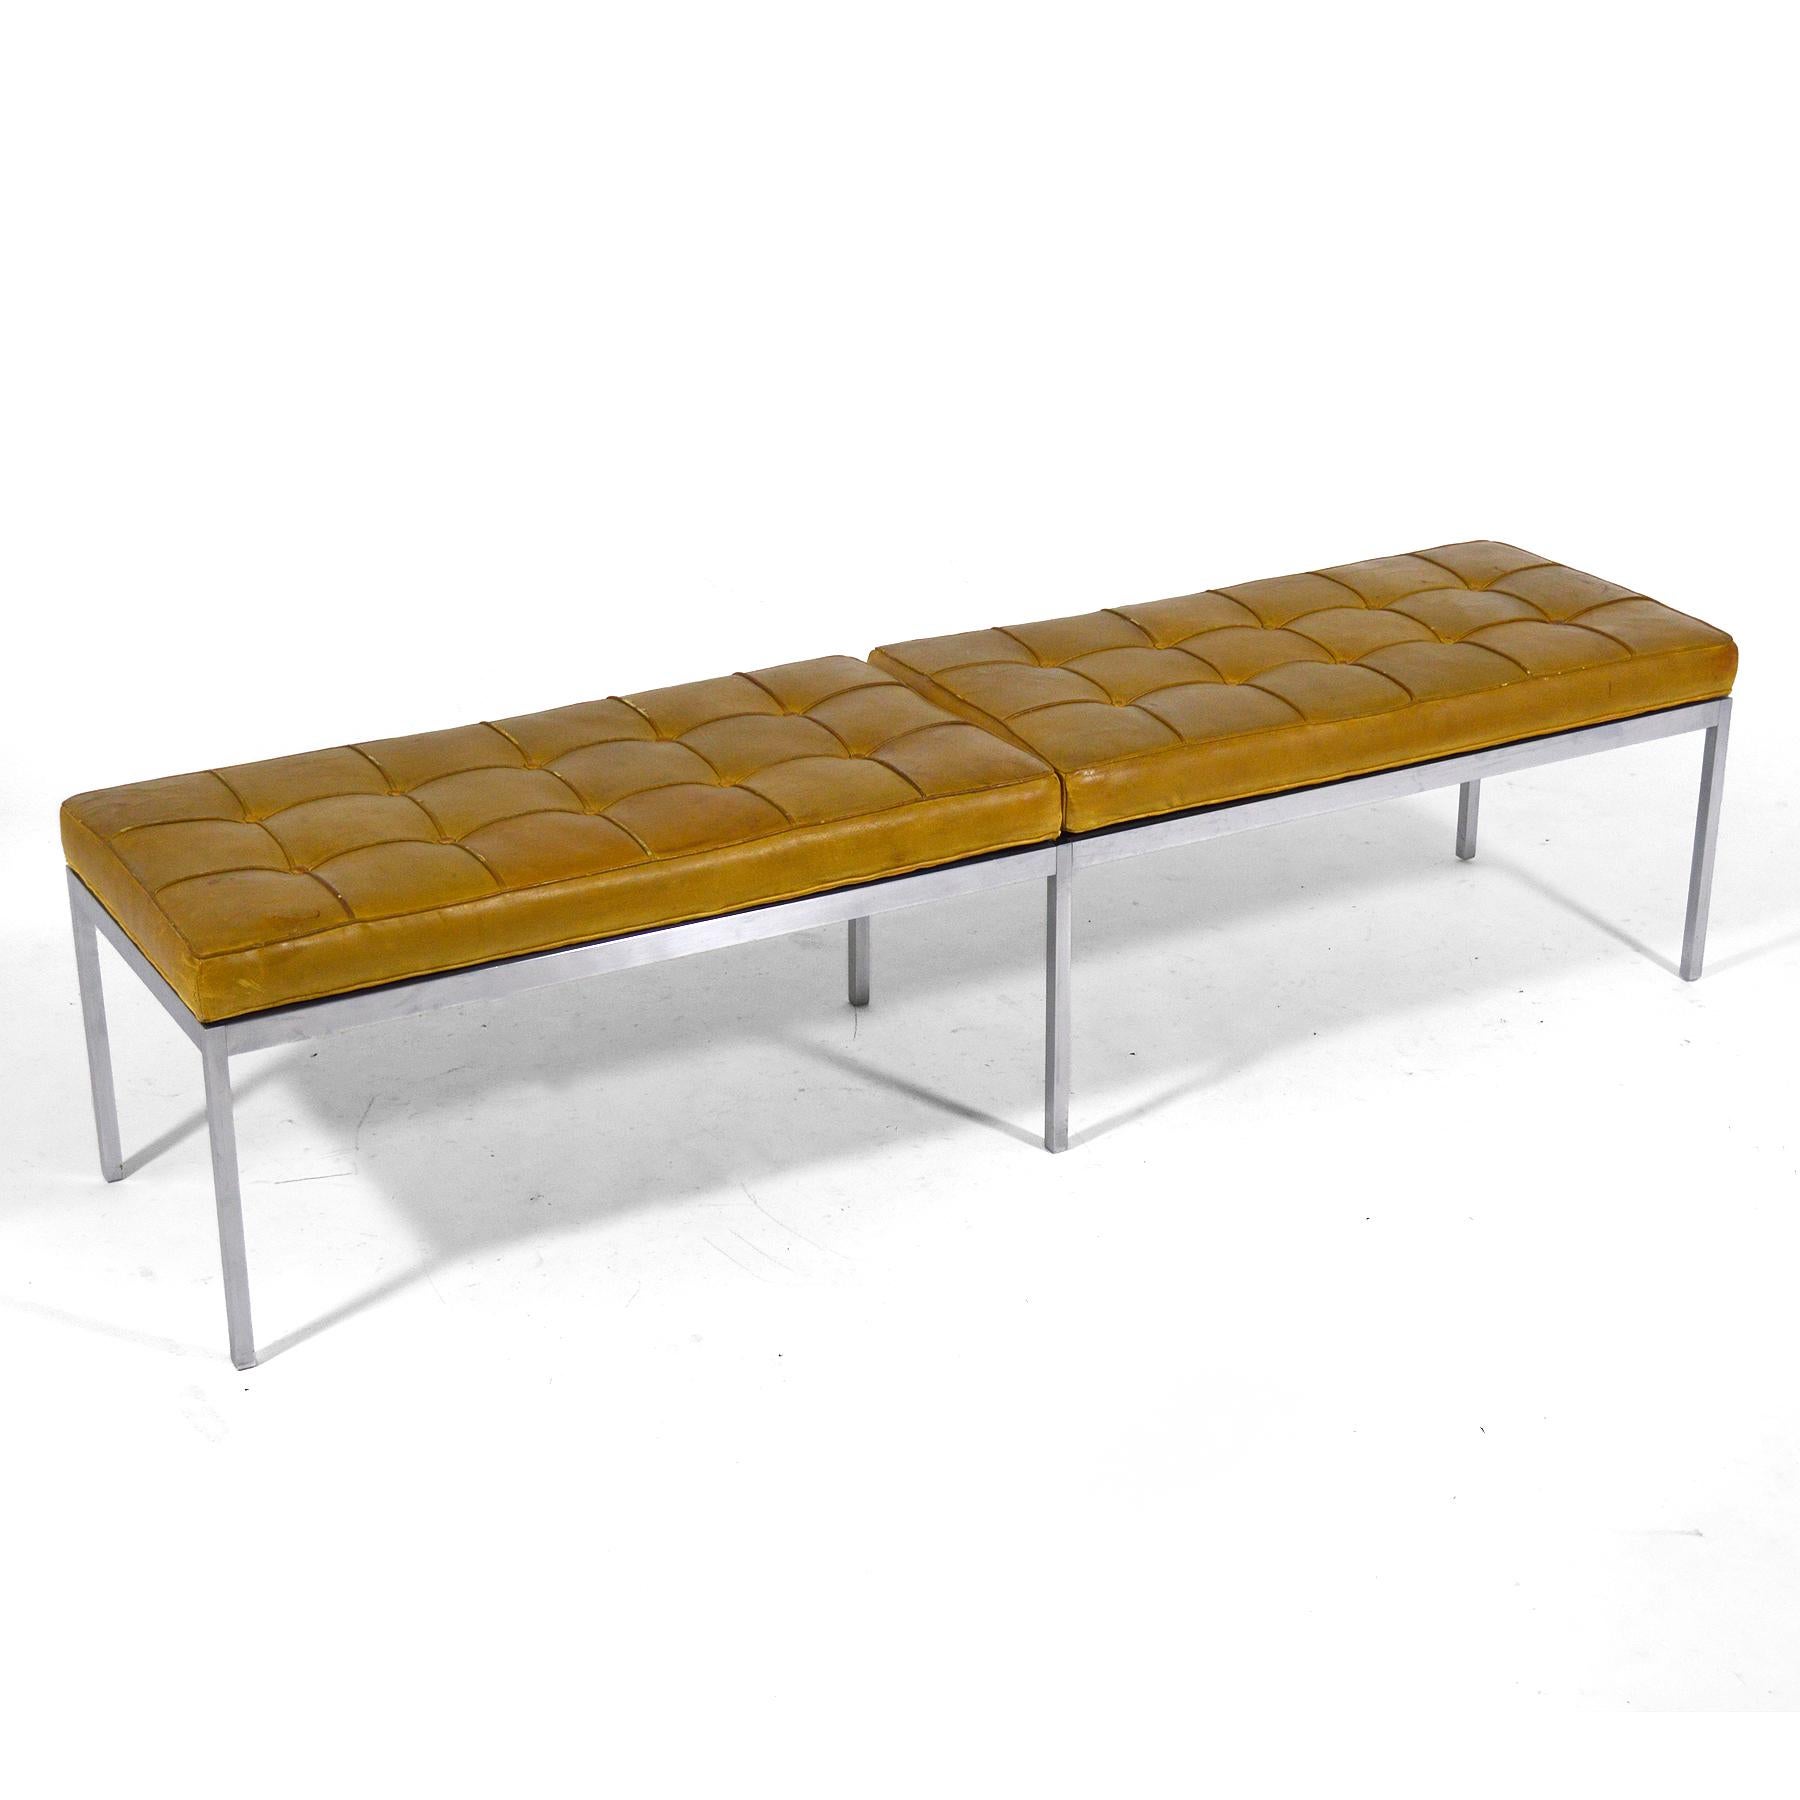 This upholstered bench is one the advanced collector will appreciate. It typifies Florence Knoll's designs aesthetic: refined, understated, with exceptional details and quality materials and construction. Florence learned from Mies the principals of